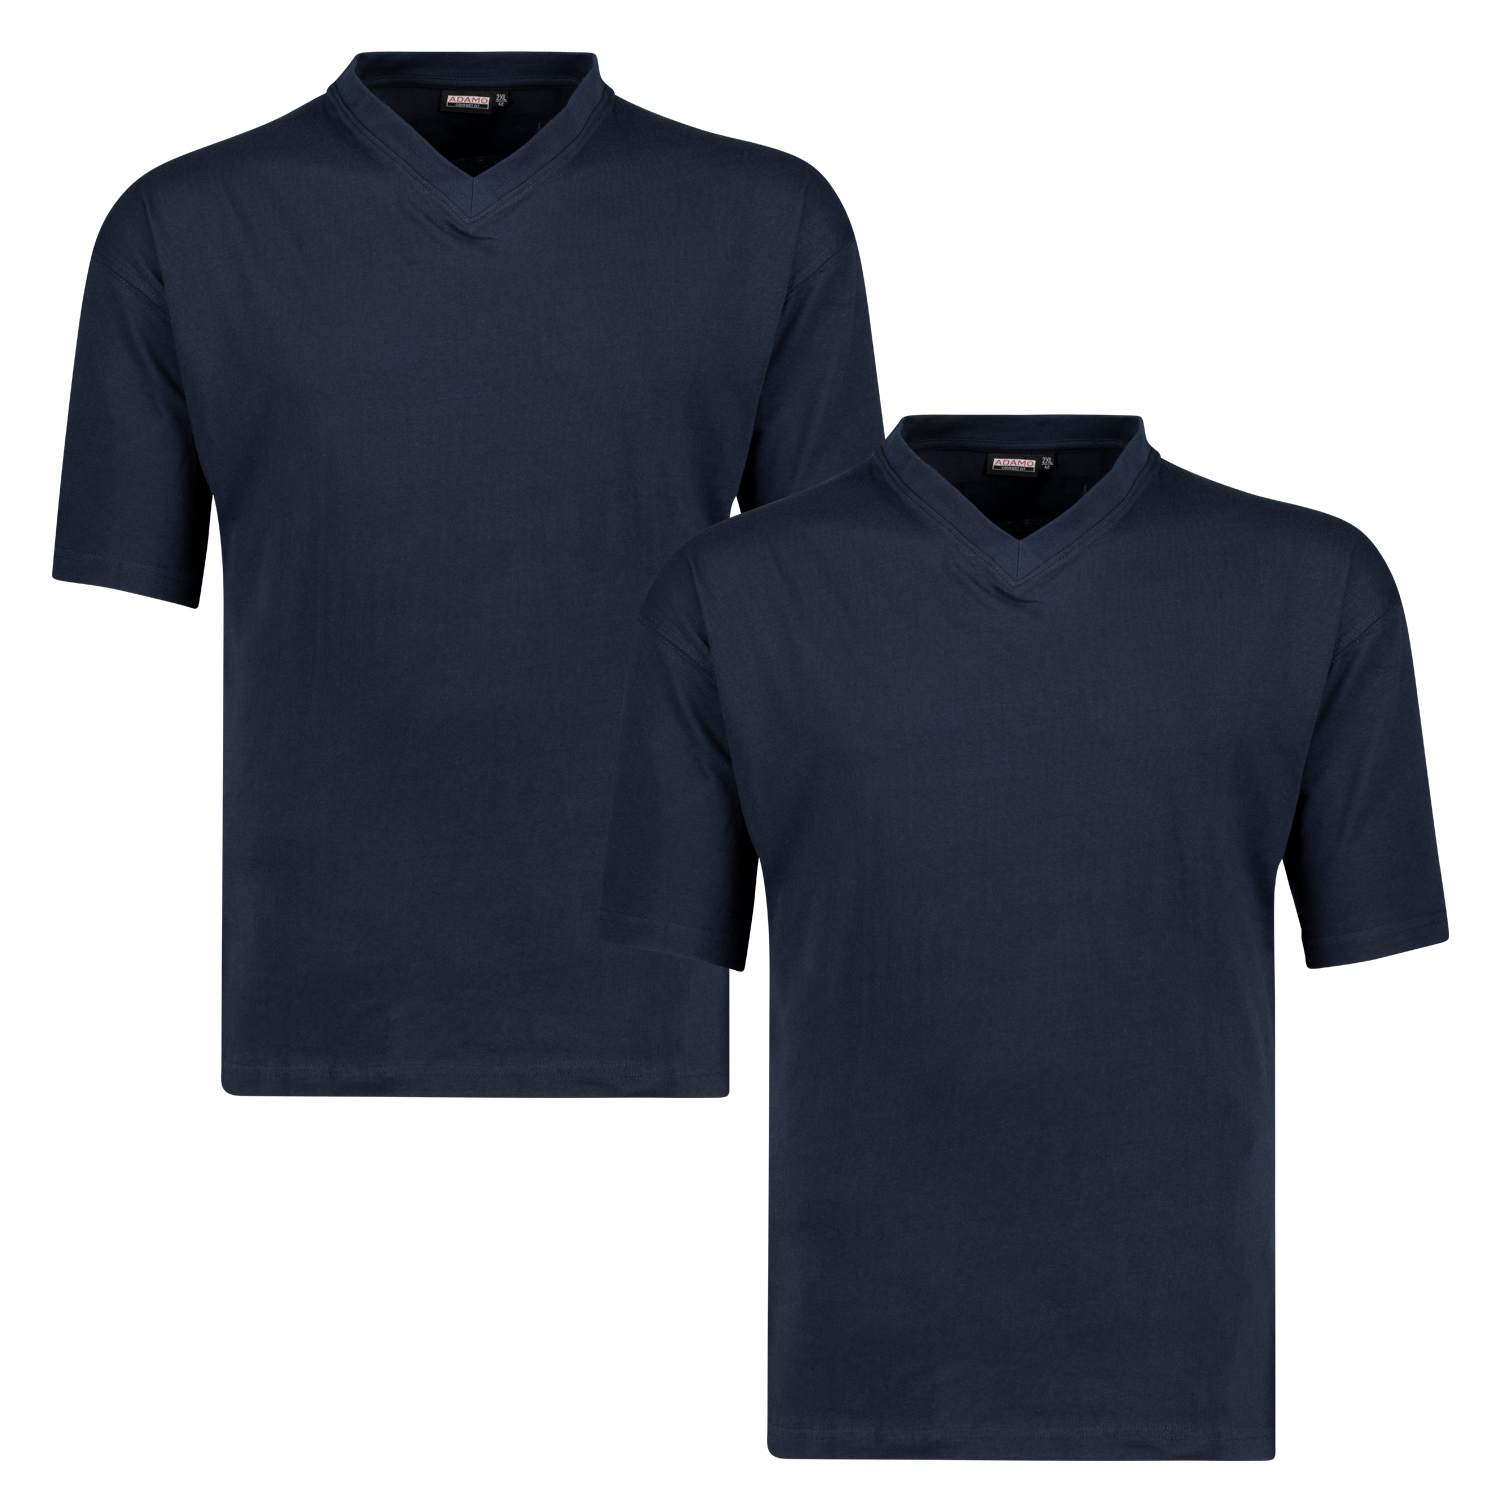 V-Neck T-shirts in navy series MAVERICK by Adamo for men up to oversize 12XL - double pack